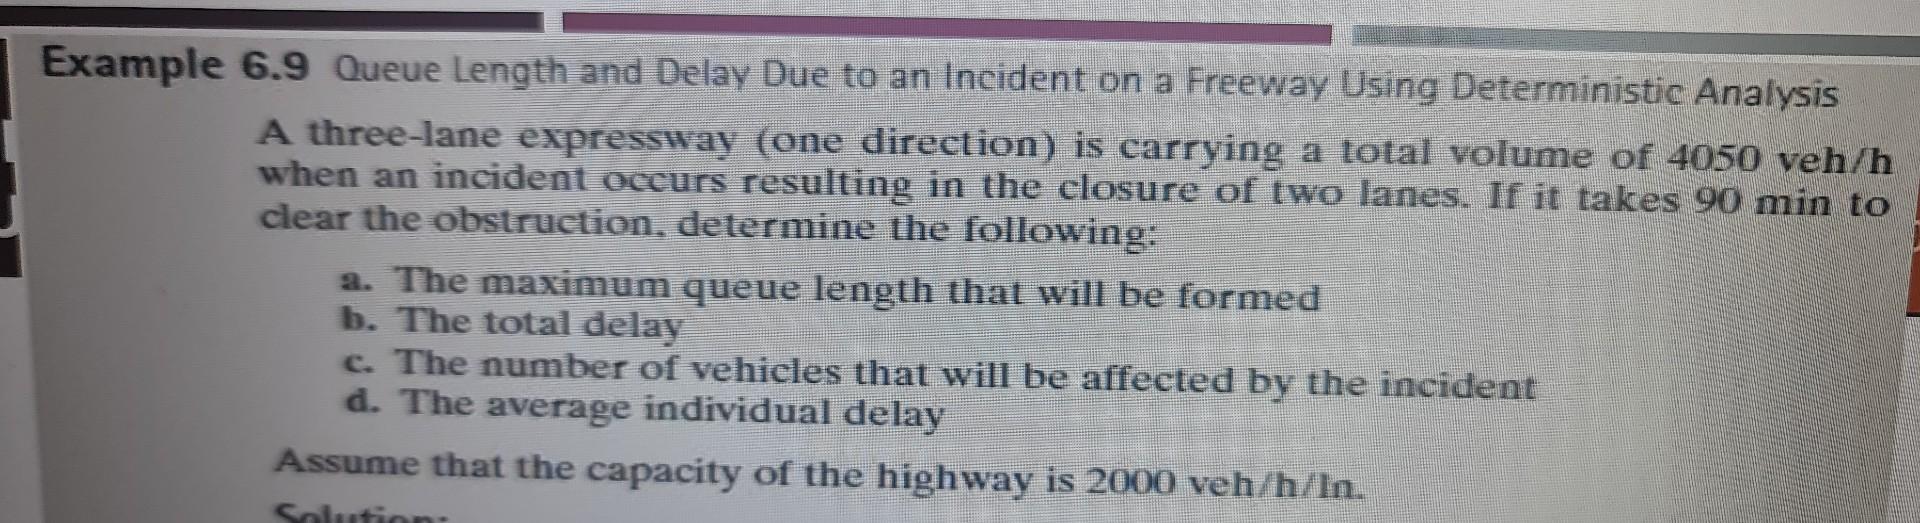 6.9 Queue Length and Delay Due to an Incident on a Freeway Using Deterministic Analysis
A three-lane expressway (one directio